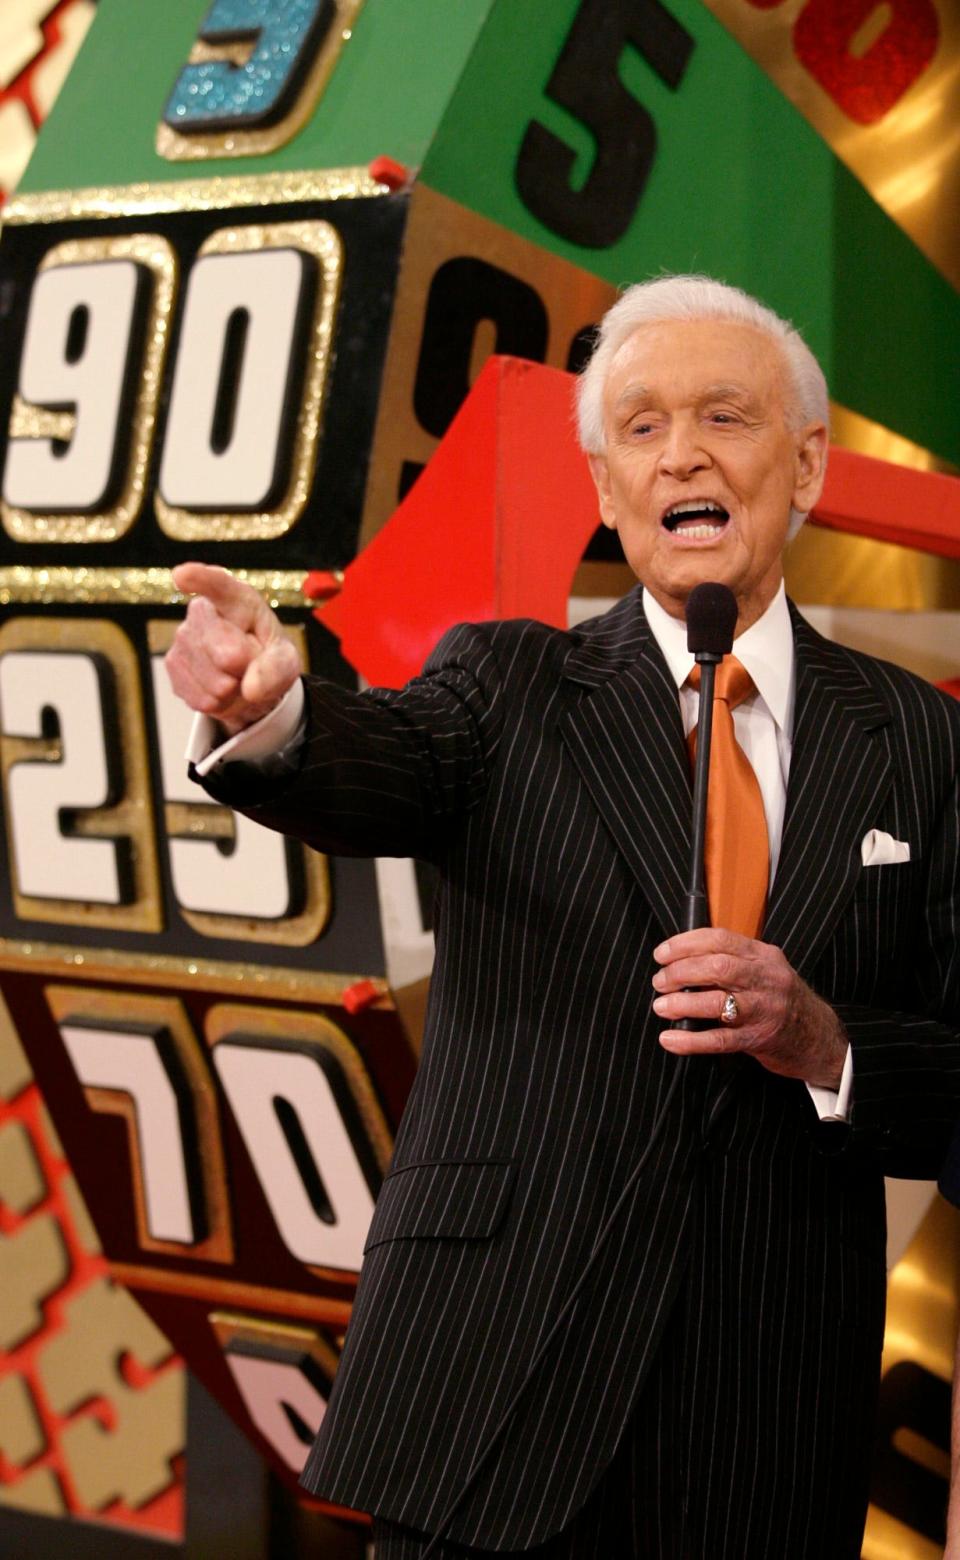 Bob Barker, who hosted 'The Price is Right' for more than 30 years